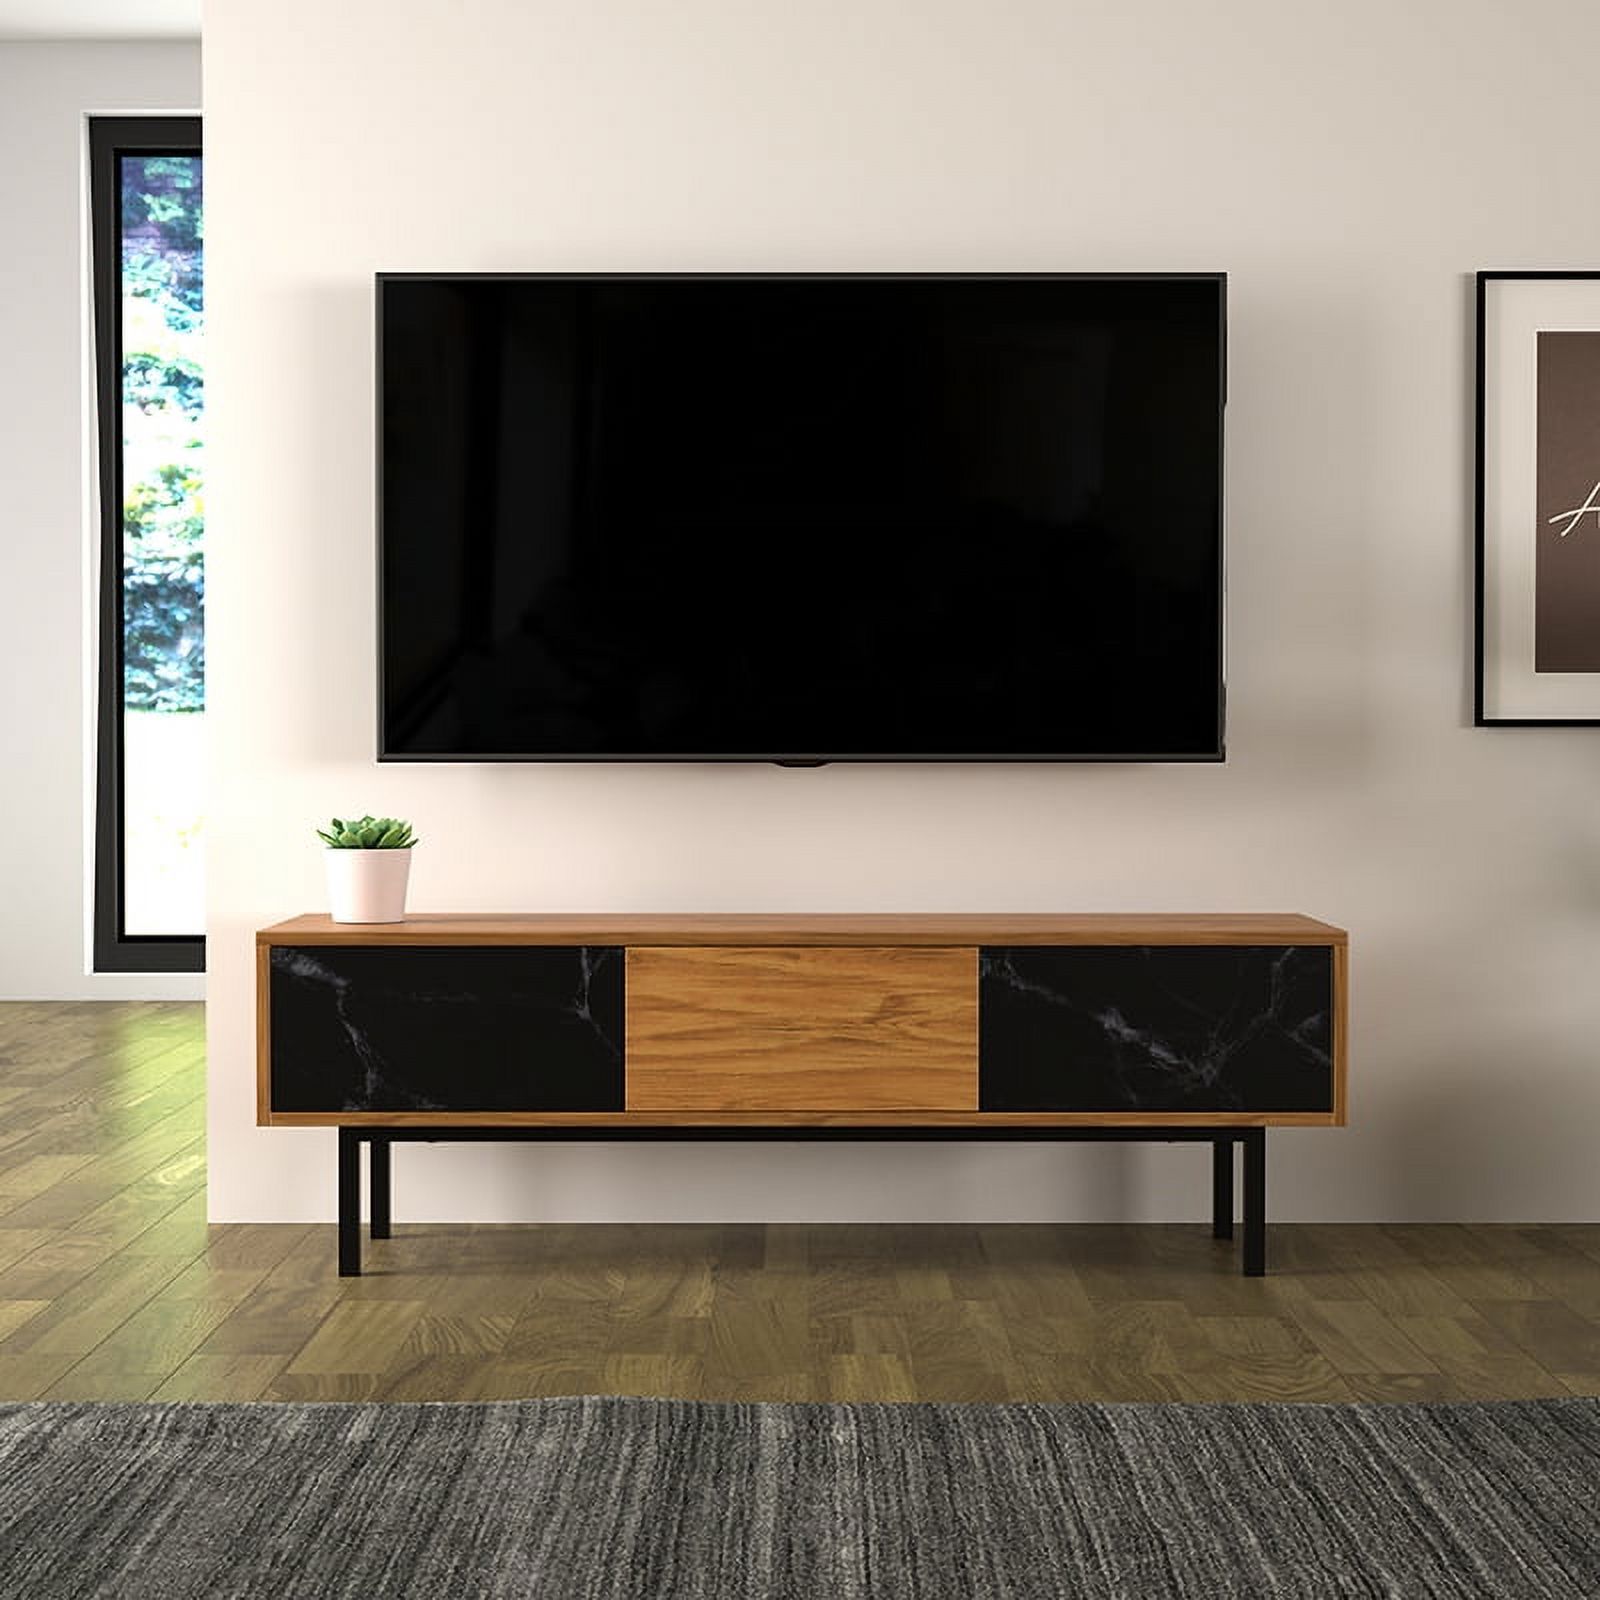 FS1400SKYW-A Skyline TV Stand for TVs 32”, 37”, 39”, 40”, 42”, 46”, 47”, 50”, 52”, 55”, 58”, 60”, 65”, Walnut Finish, plus Black Marble-Effect Doors, Includes Cable Management. - image 3 of 3